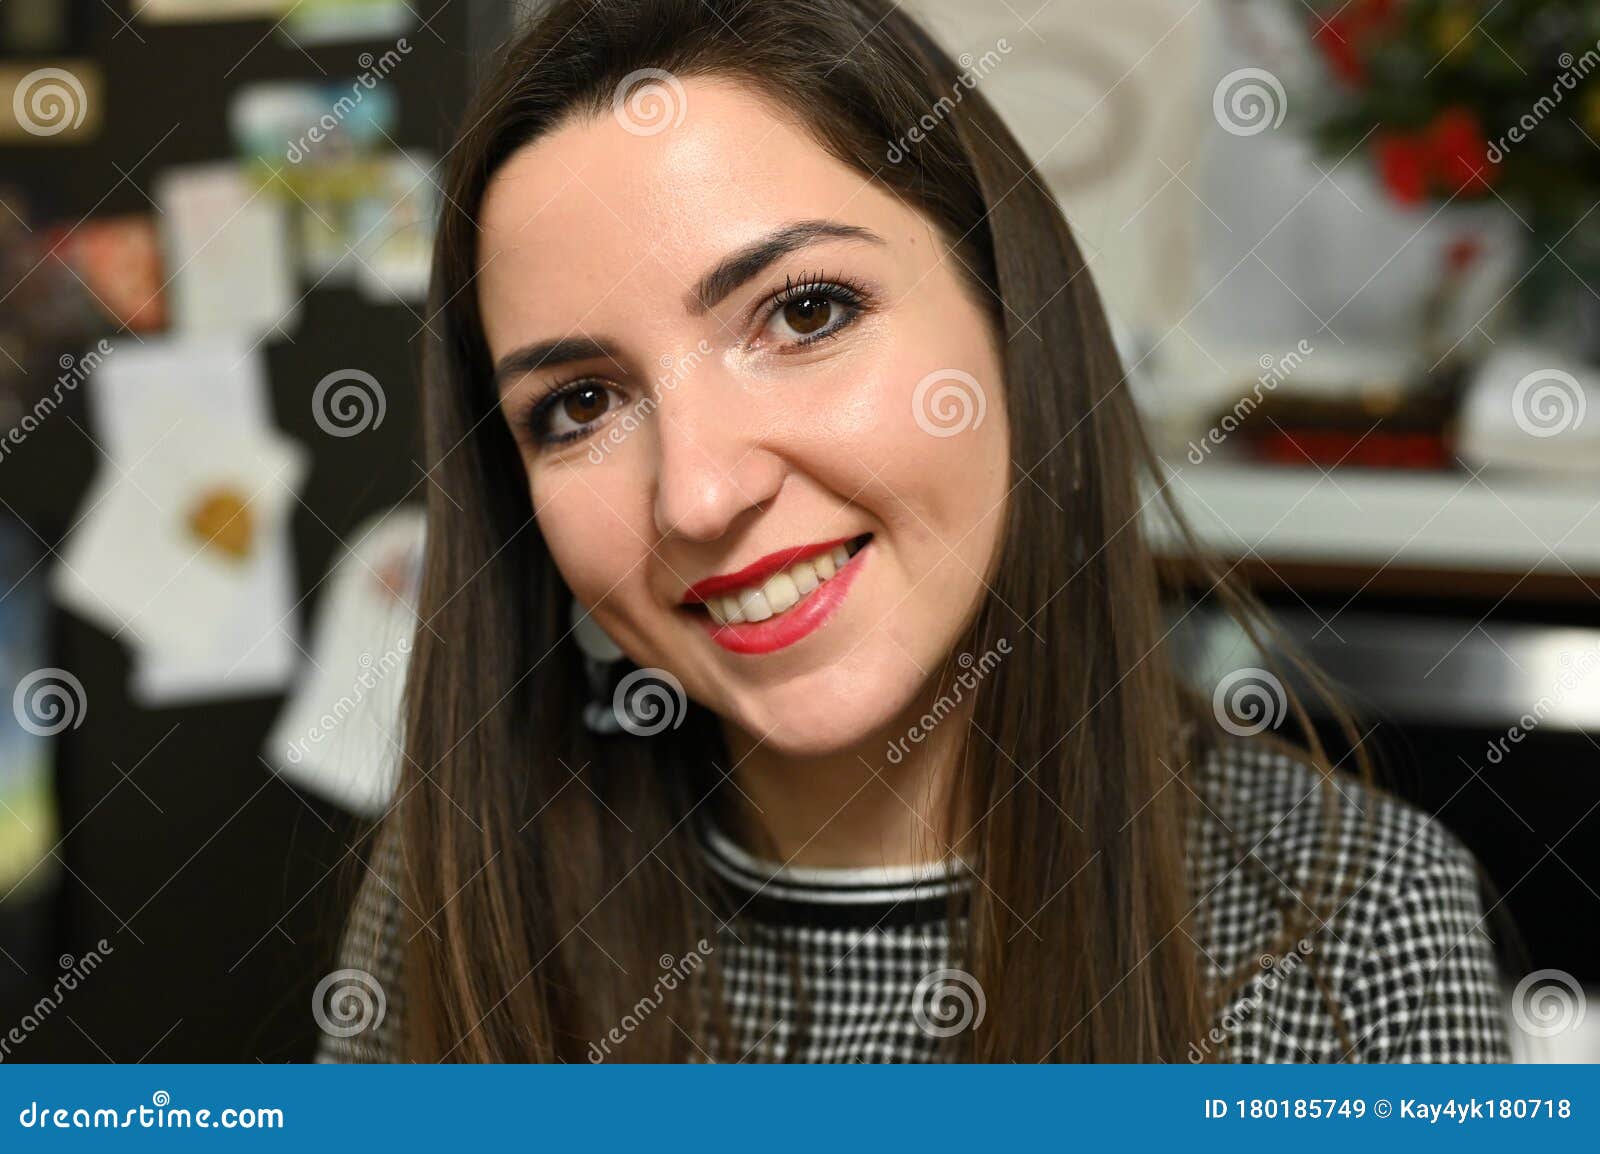 portrait of a smiling girl at home